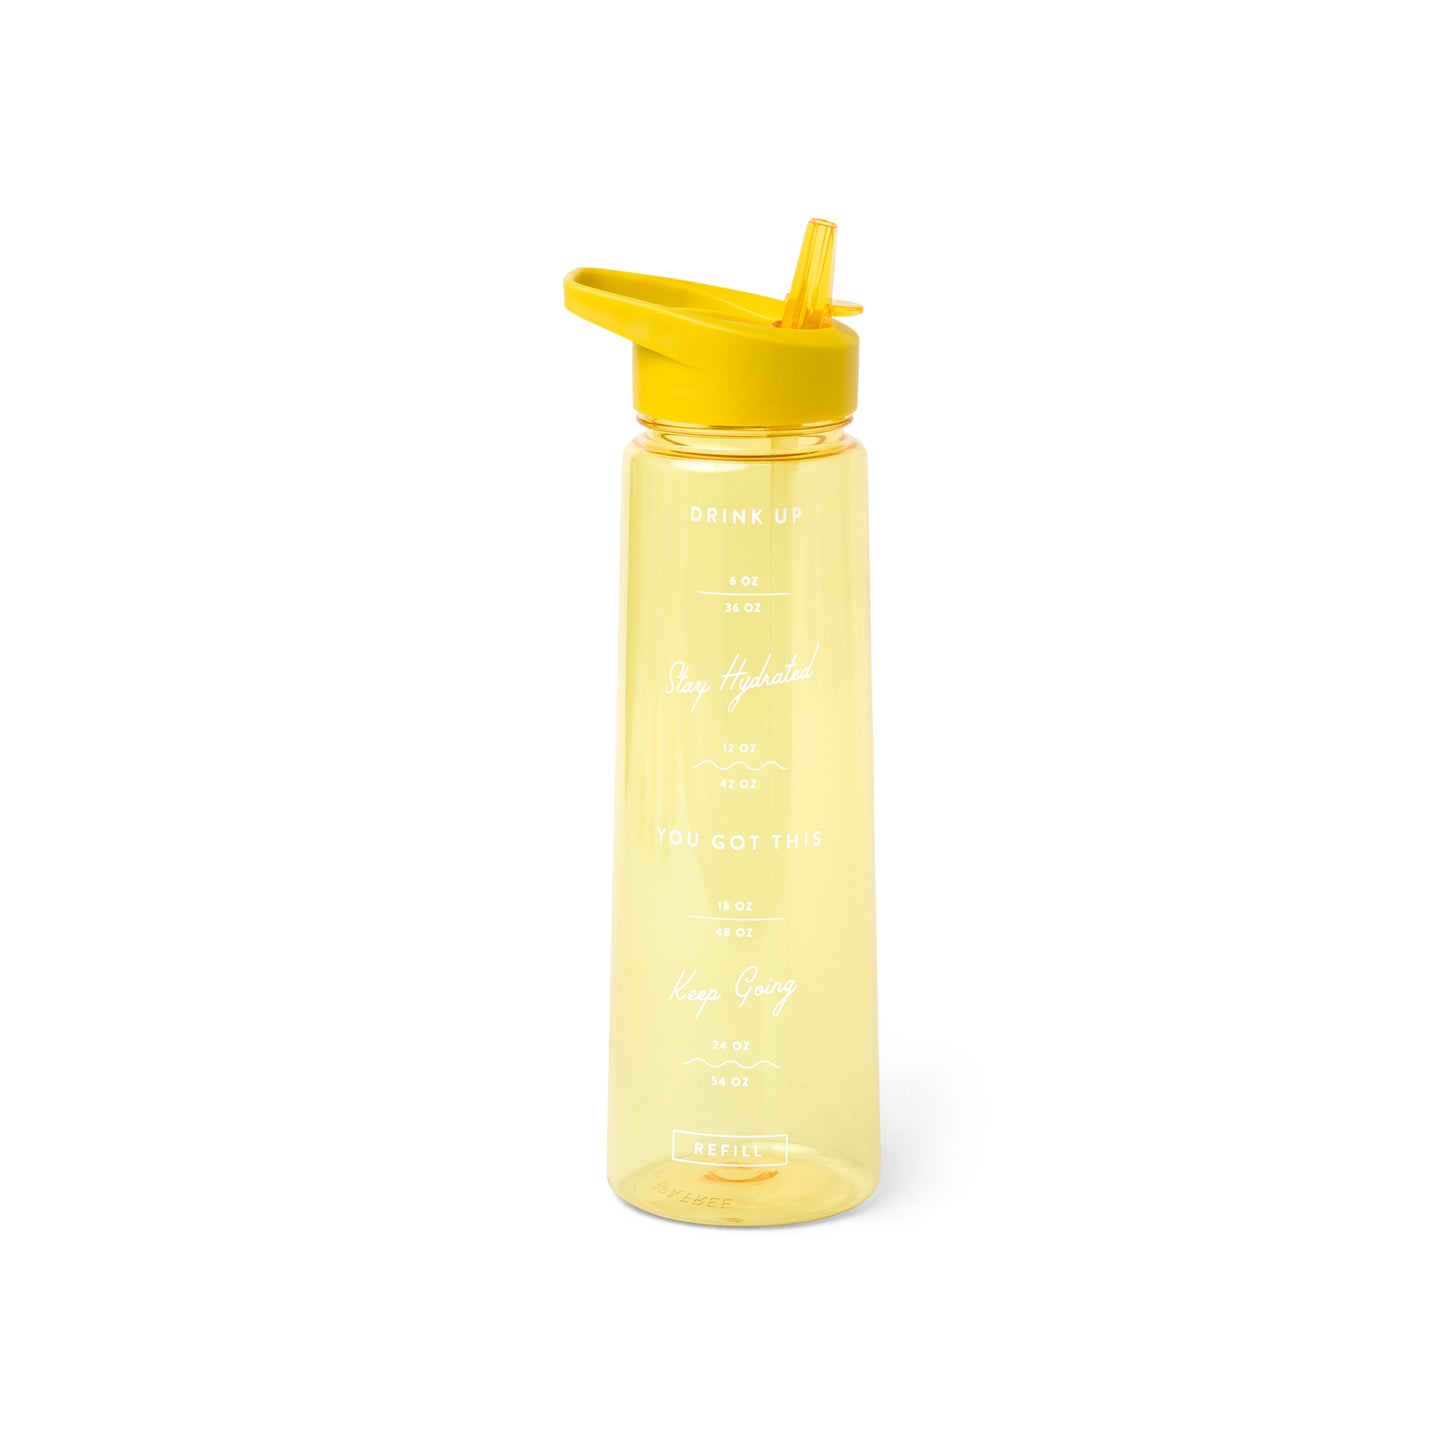 Wellness Waterbottle with Tracker 30 fl oz. - Chartreuse